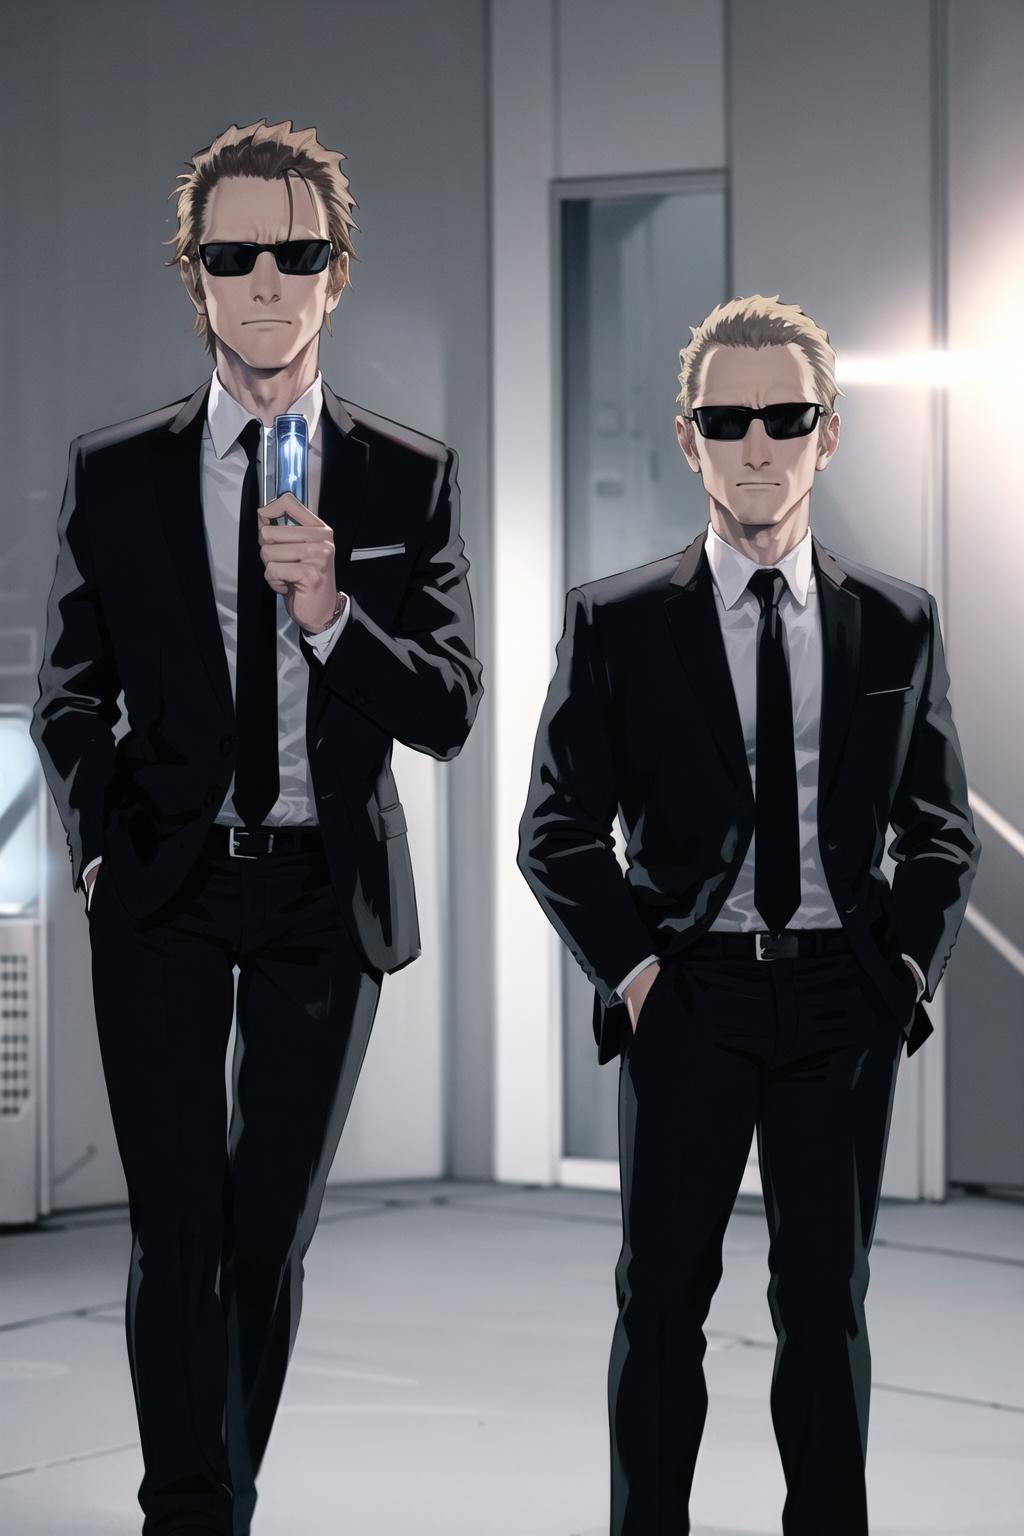 MIB Suit and Neuralyzer image by rulles